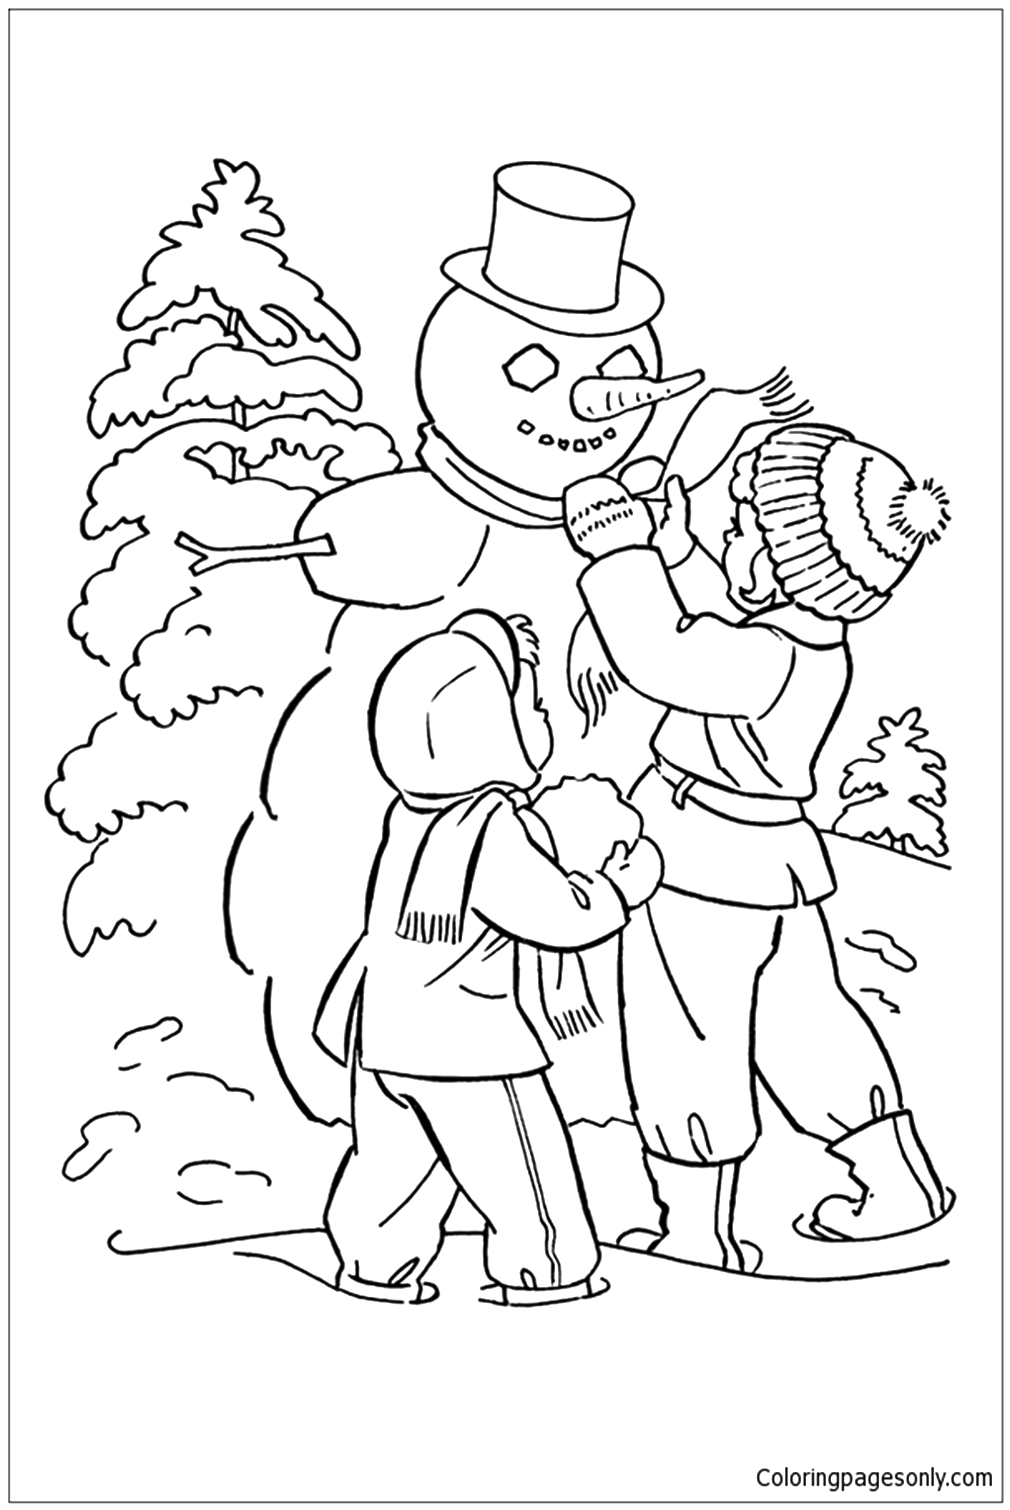 Kids Making A Snowman In Cold Season Coloring Pages